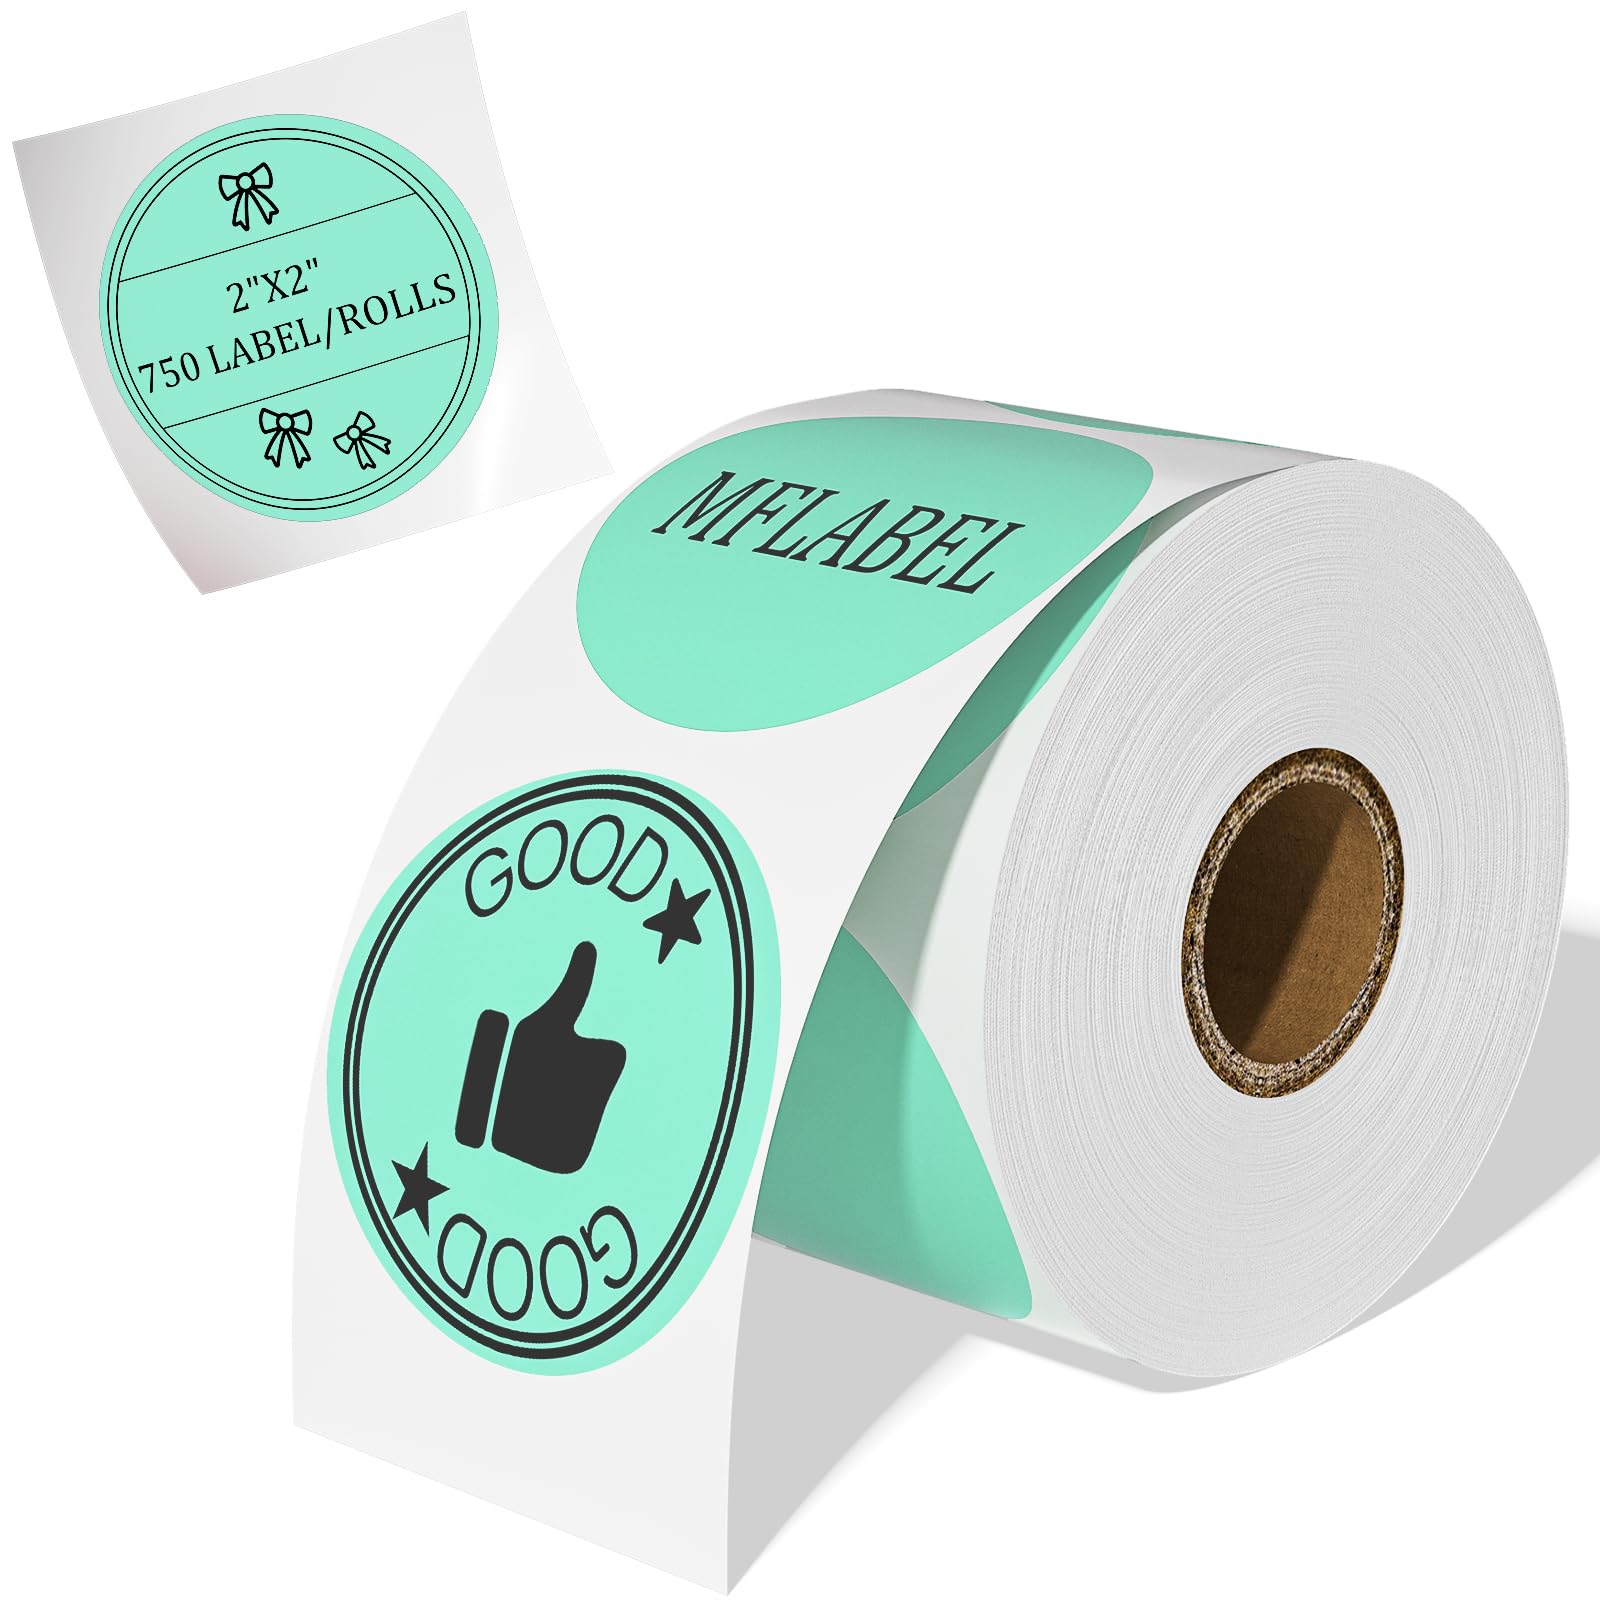 Custom self-adhesive labels and stickers